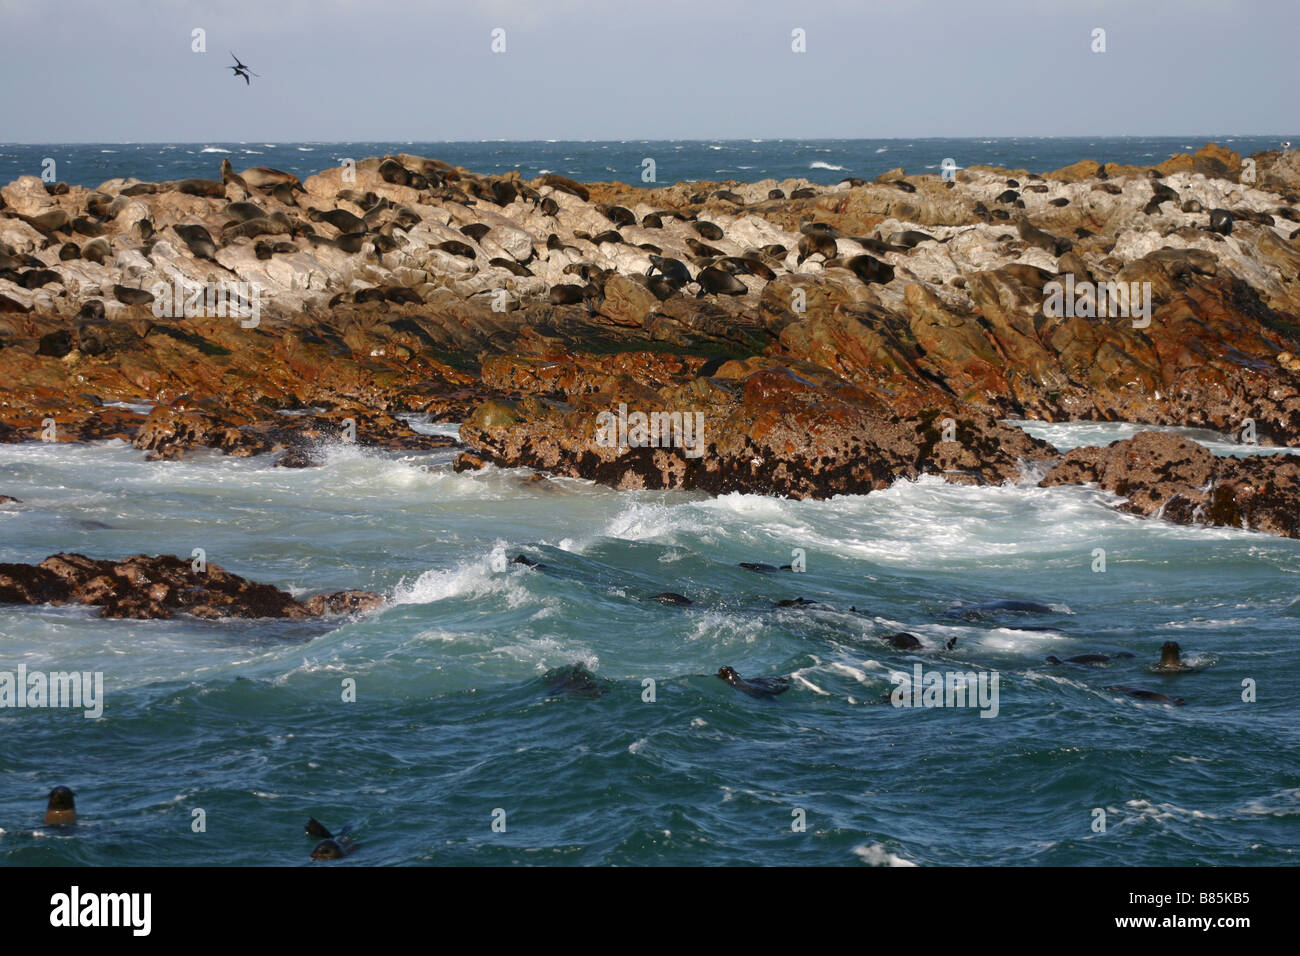 Seals in the Ocean off Hermanus in South Africa's Cape Town Region Shot on Tourist Whalewatching Tour Stock Photo